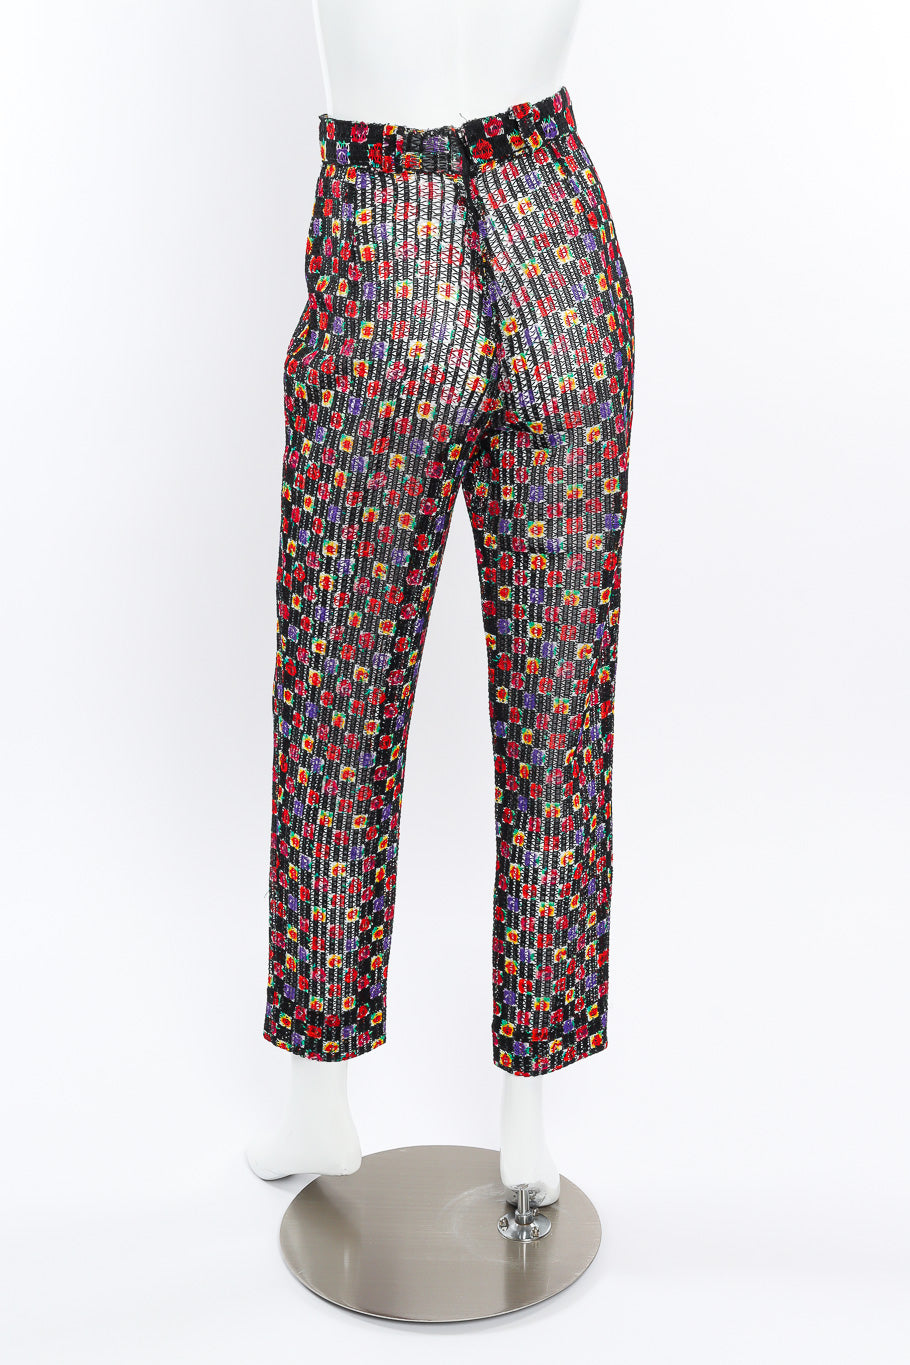 Vintage Gianni Versace Cord Mesh Checkered Rose Pant back view on mannequin @Recessla